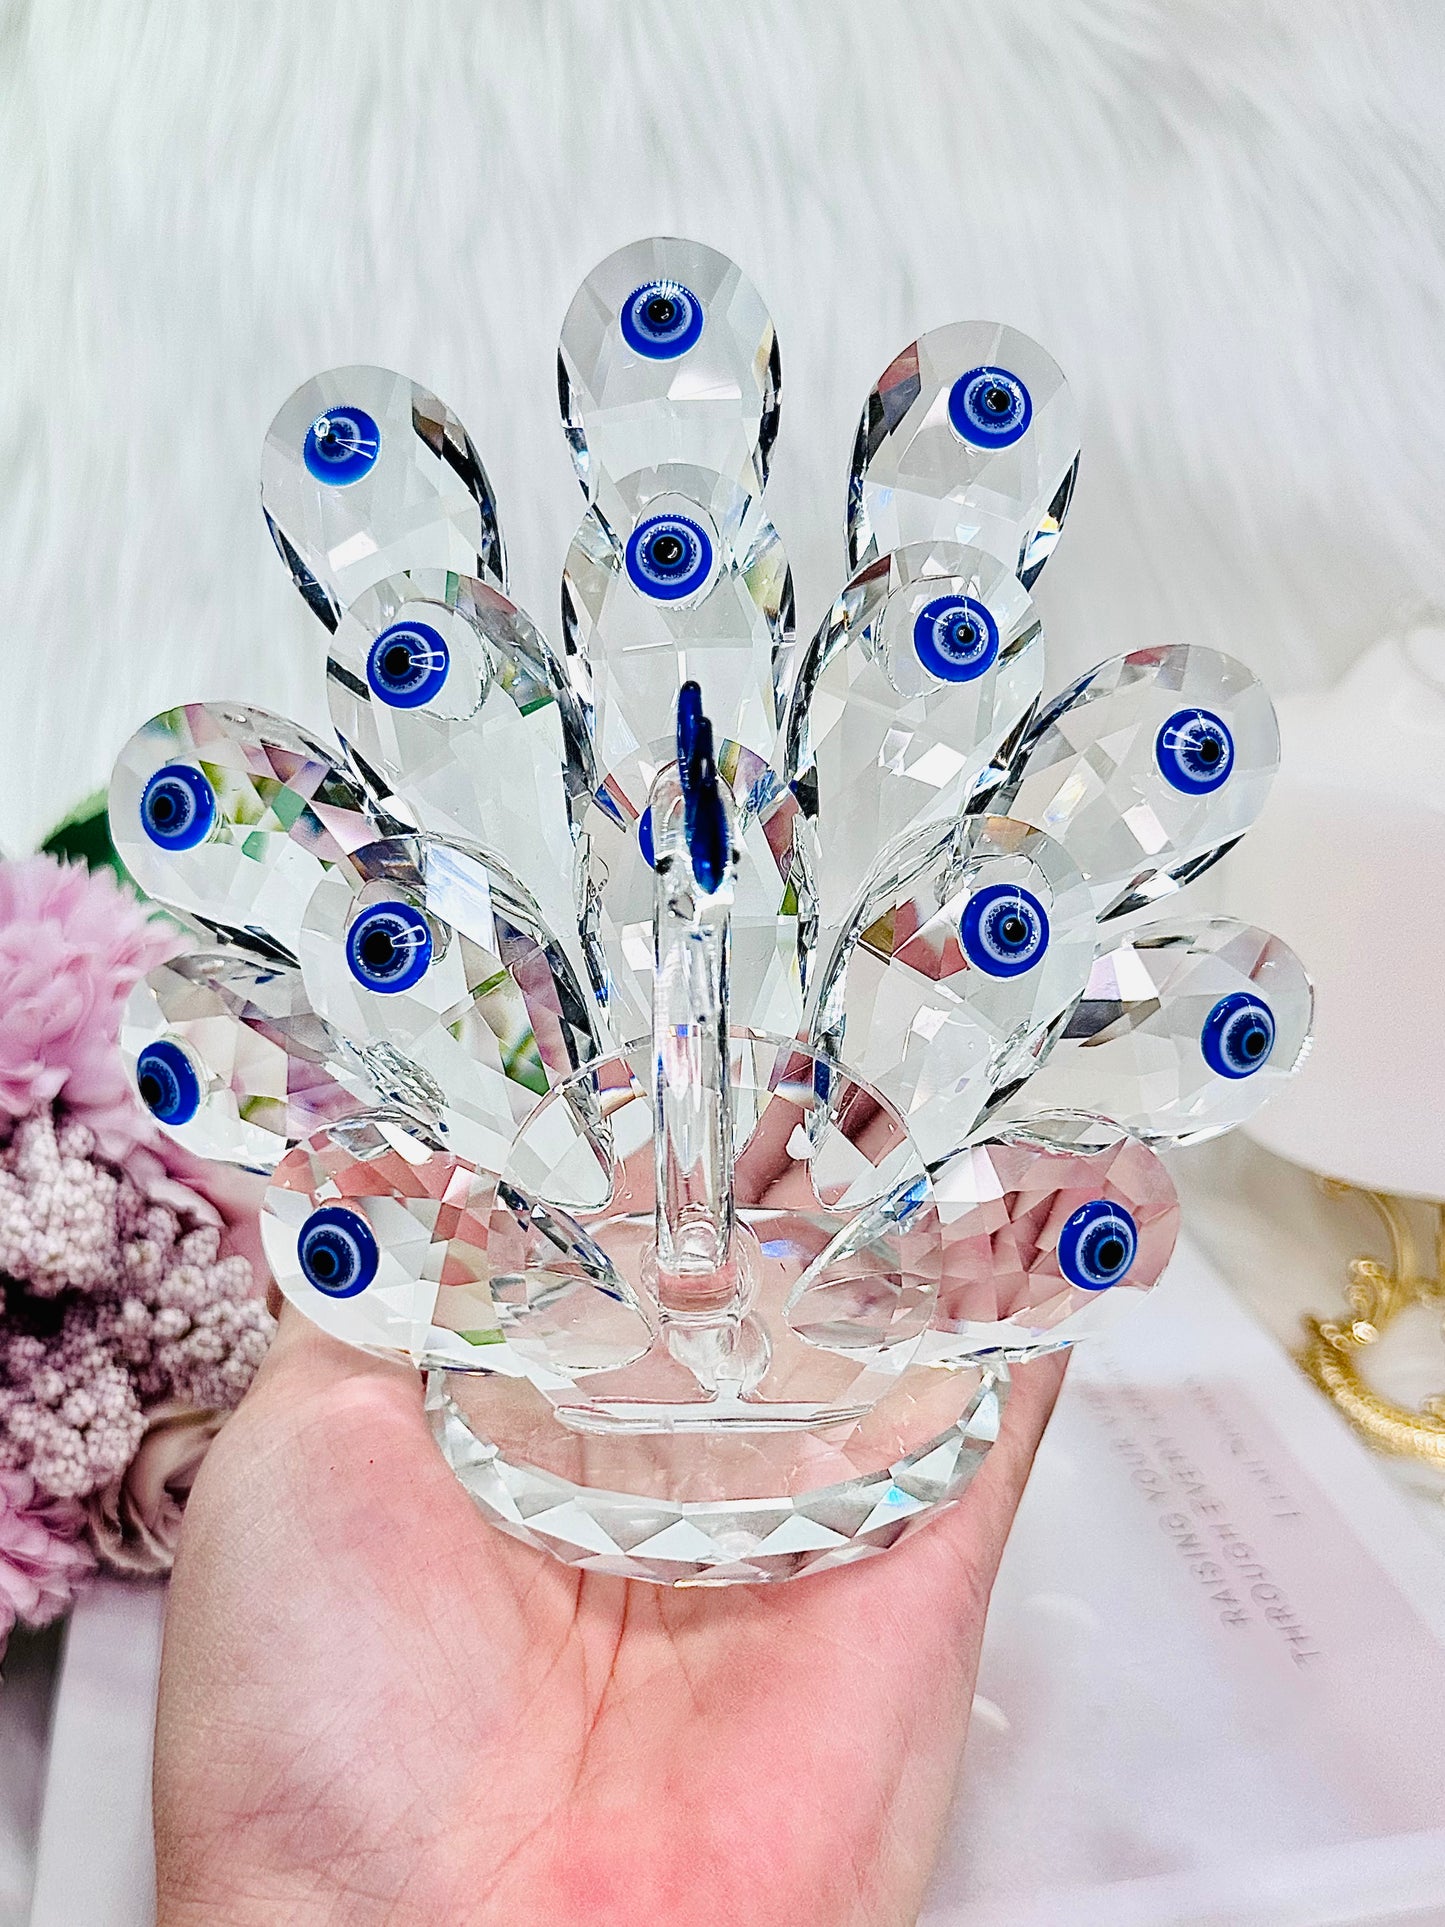 For Protection ~ Exquisite Large 15cm Glass Evil Eye Peacock Figurine combining elegance and mystique